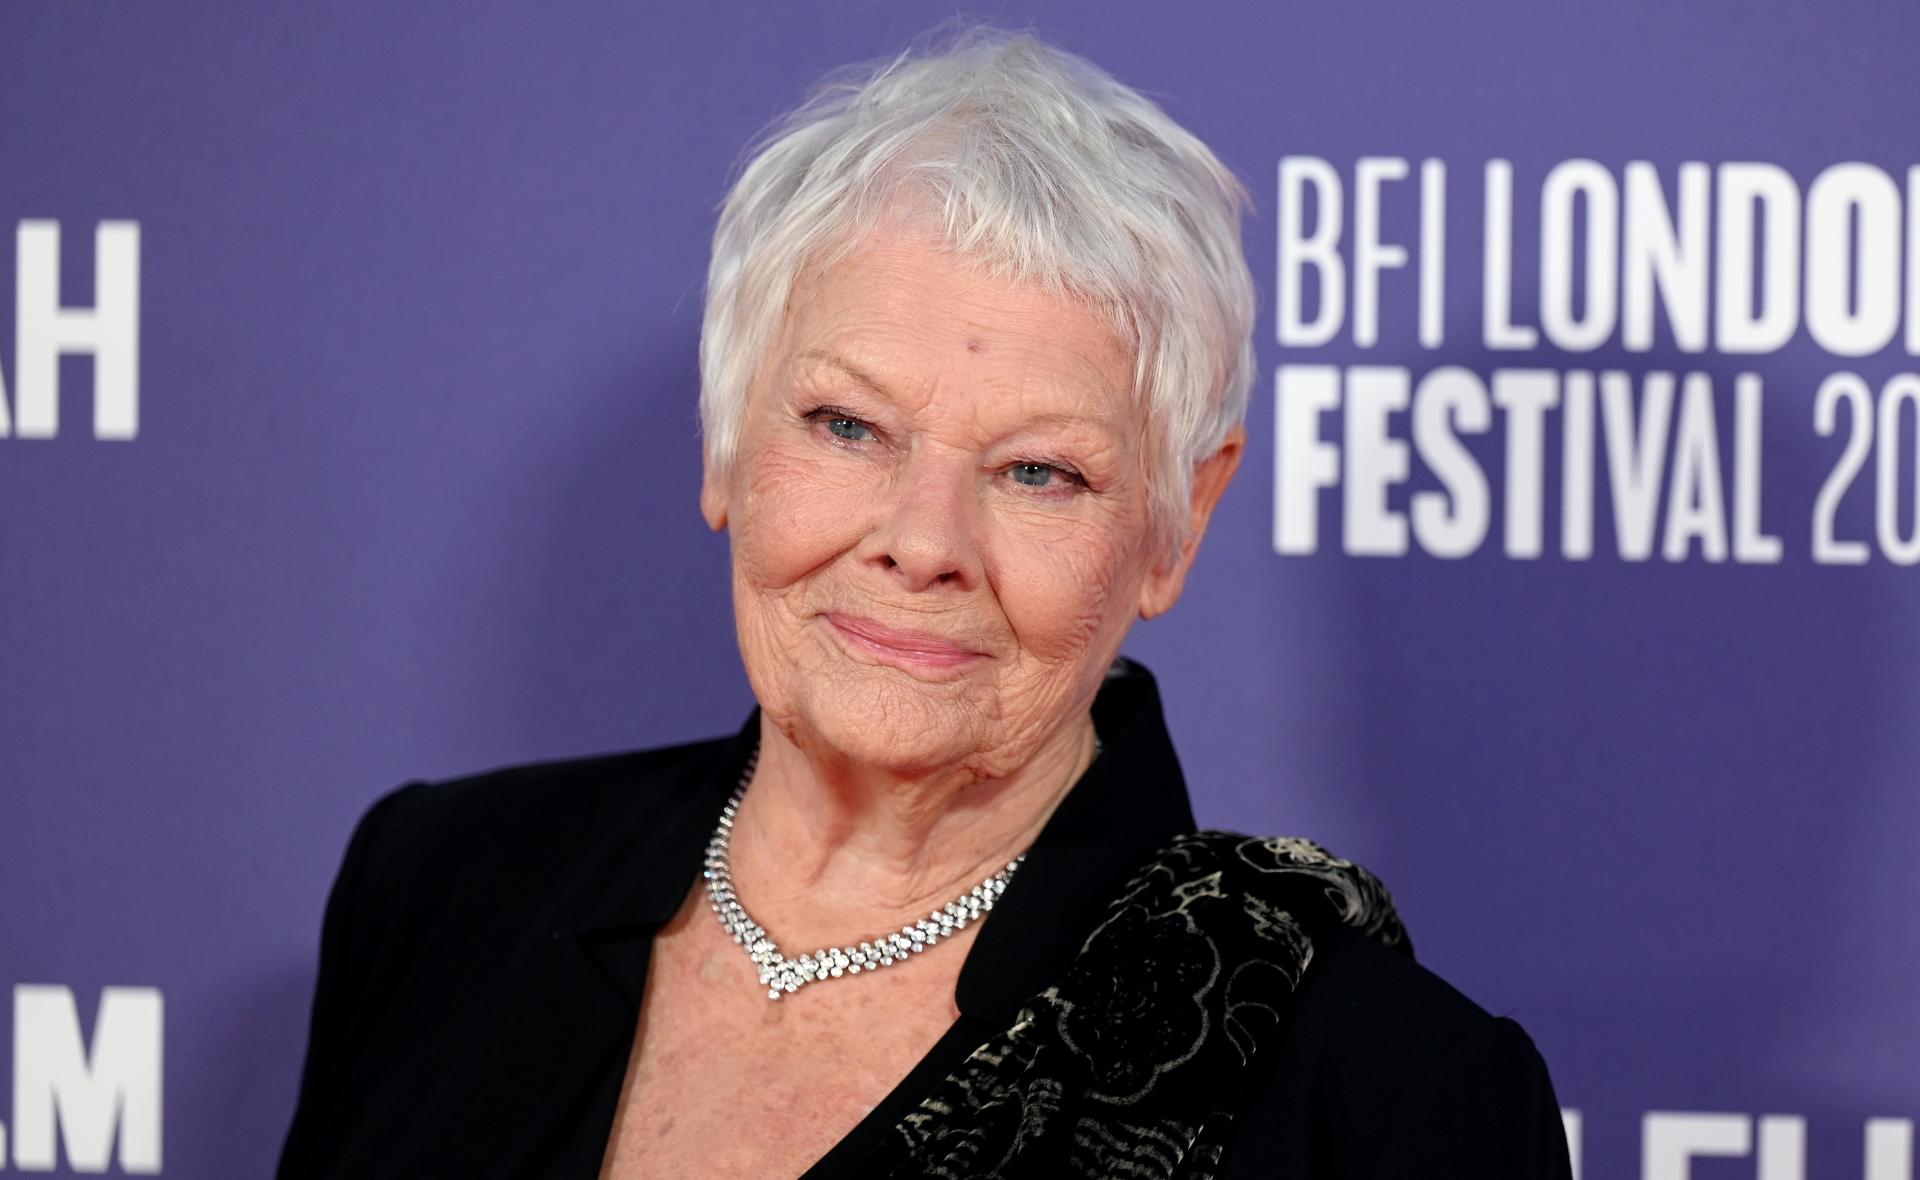 Judi Dench opens up on how her deteriorating vision has impacted her acting career